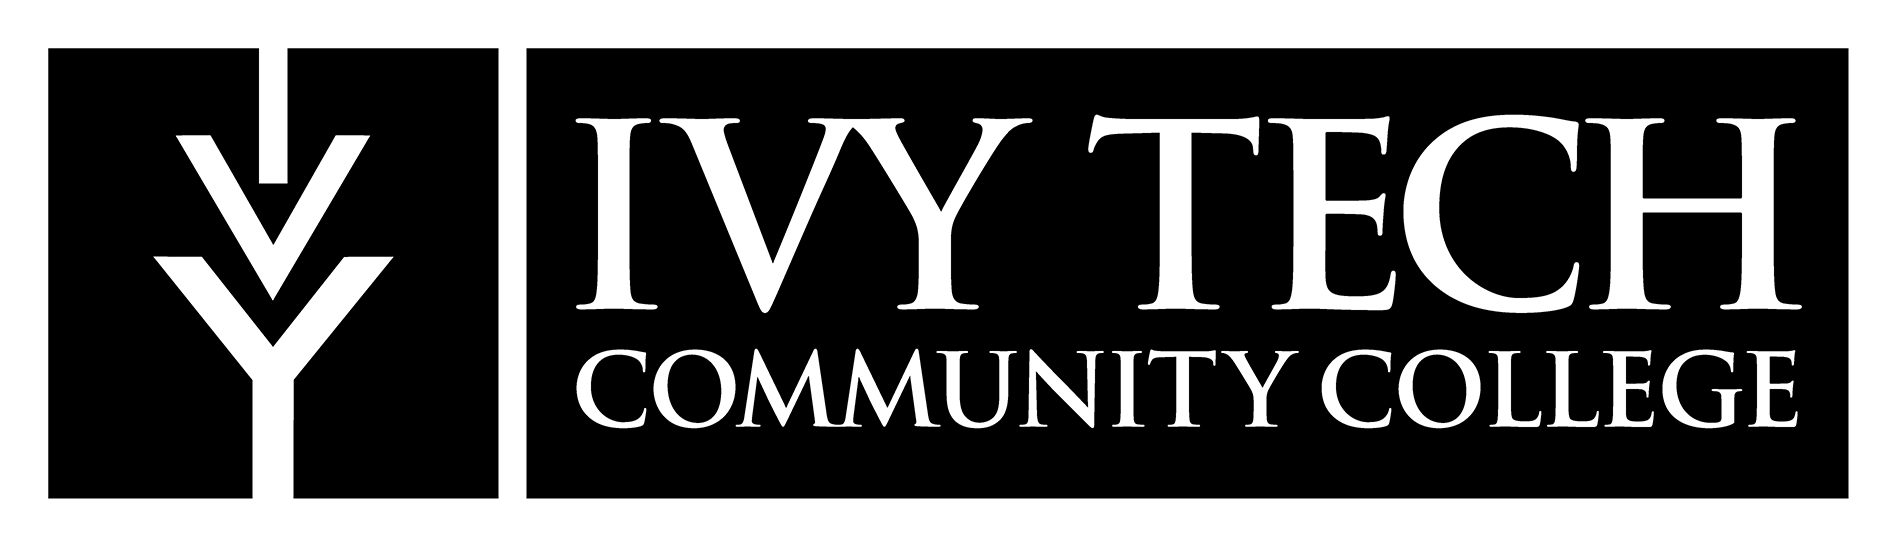 Black and White College Logo - Logos - Ivy Tech Community College of Indiana